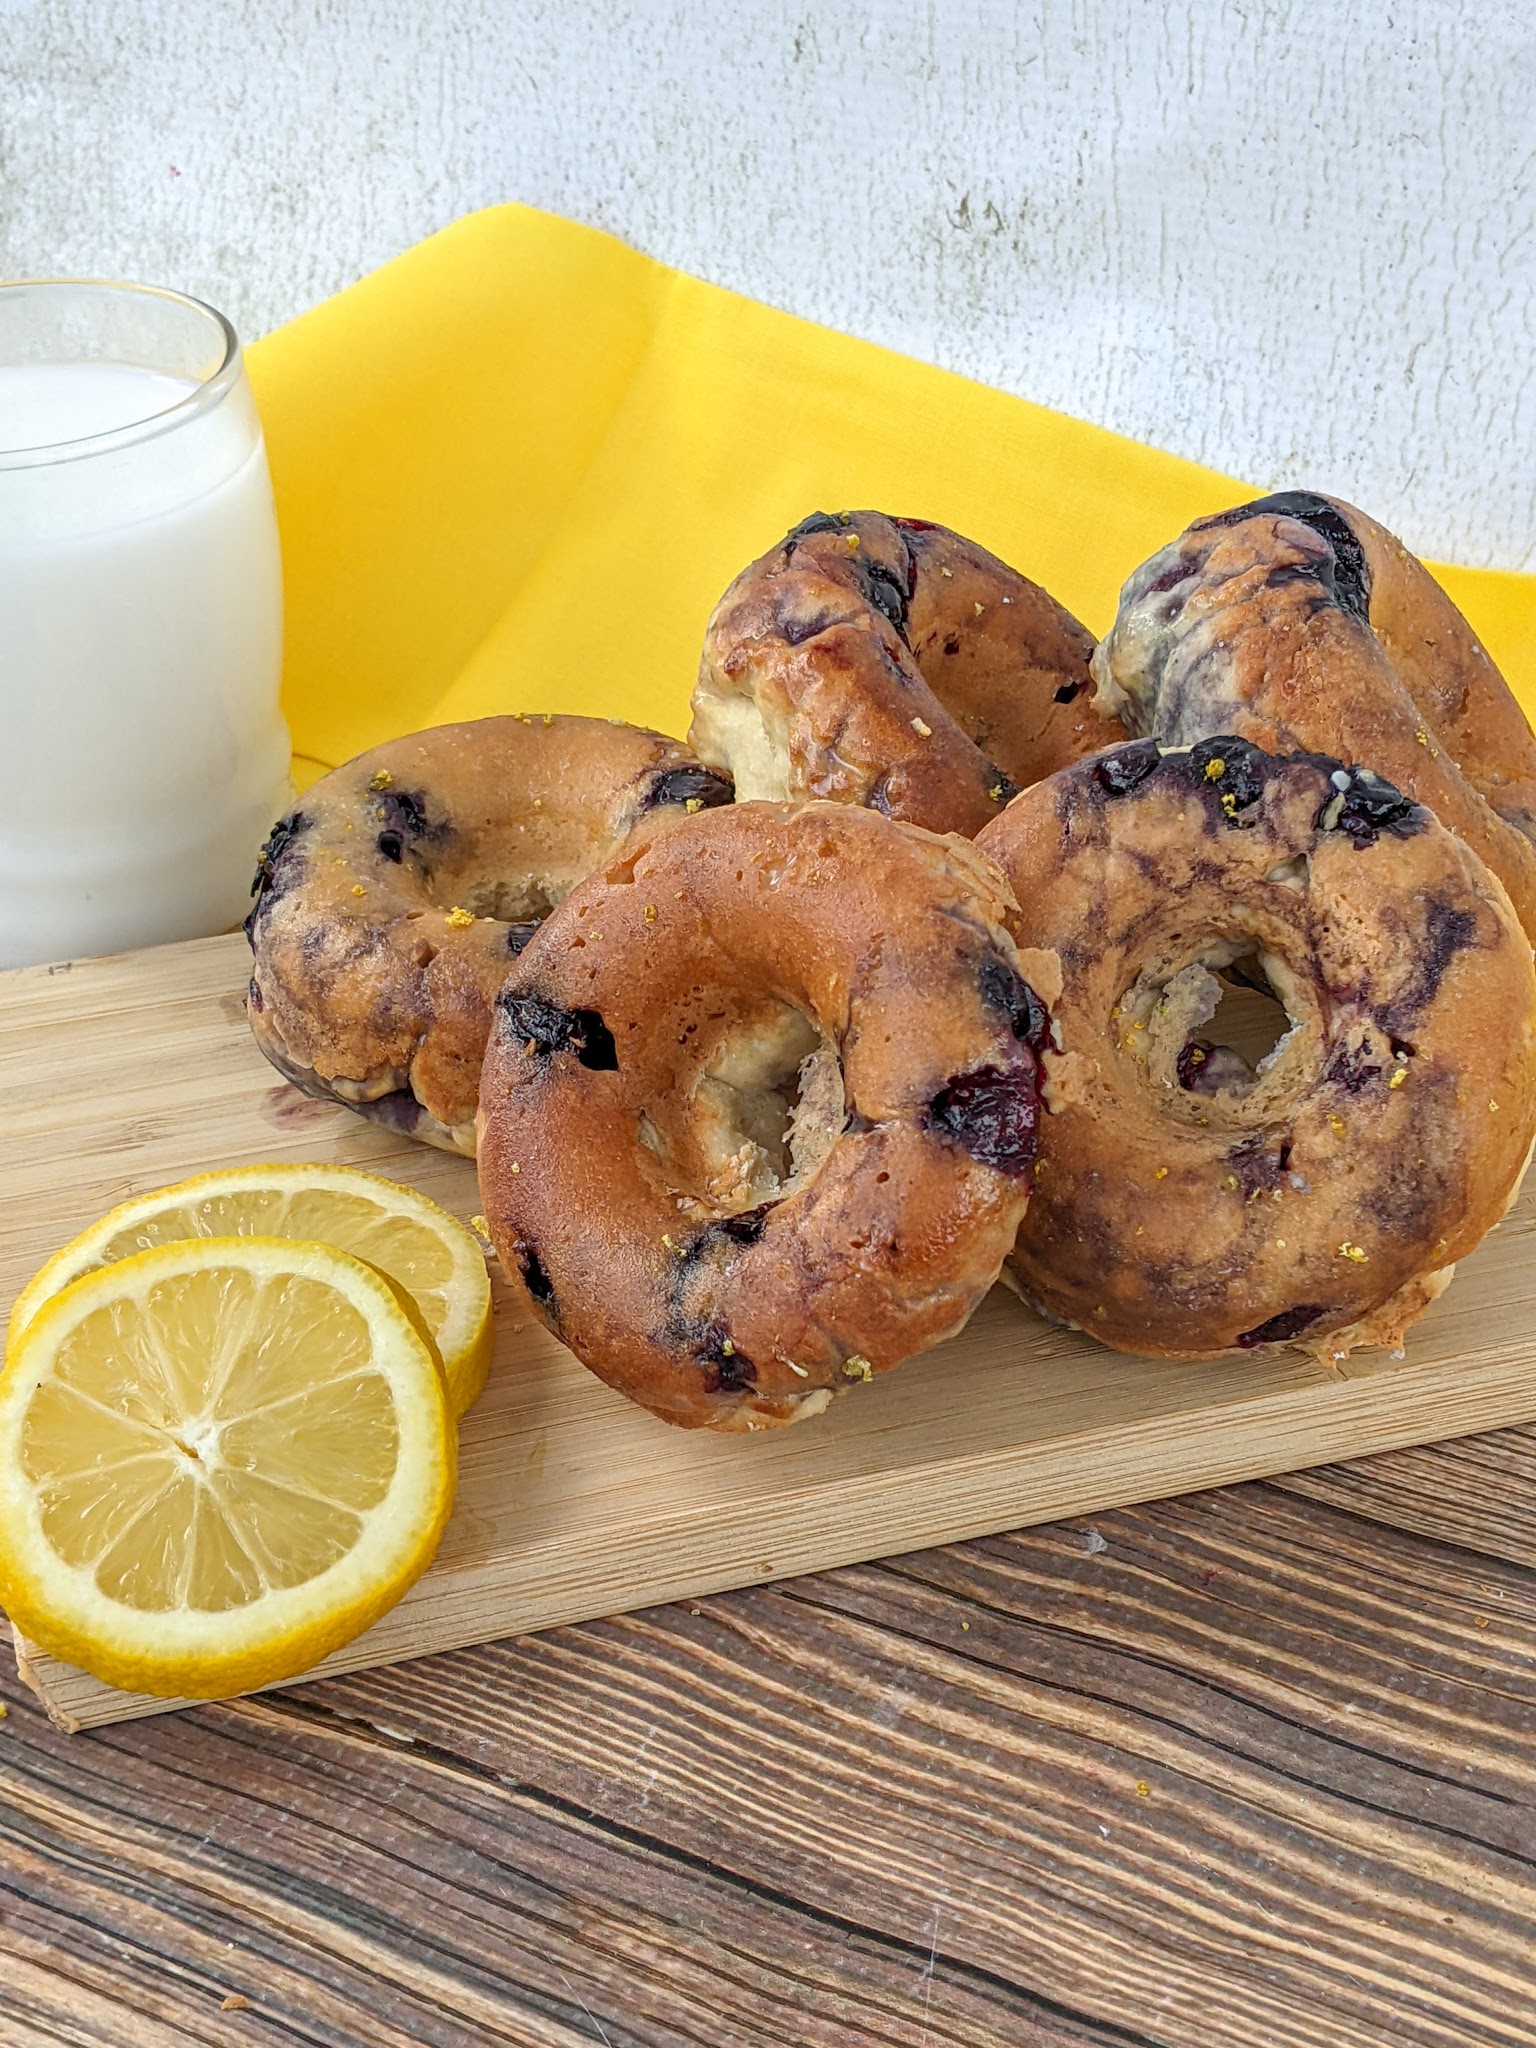 Glazed Blueberry Donuts with some lemon on the side.